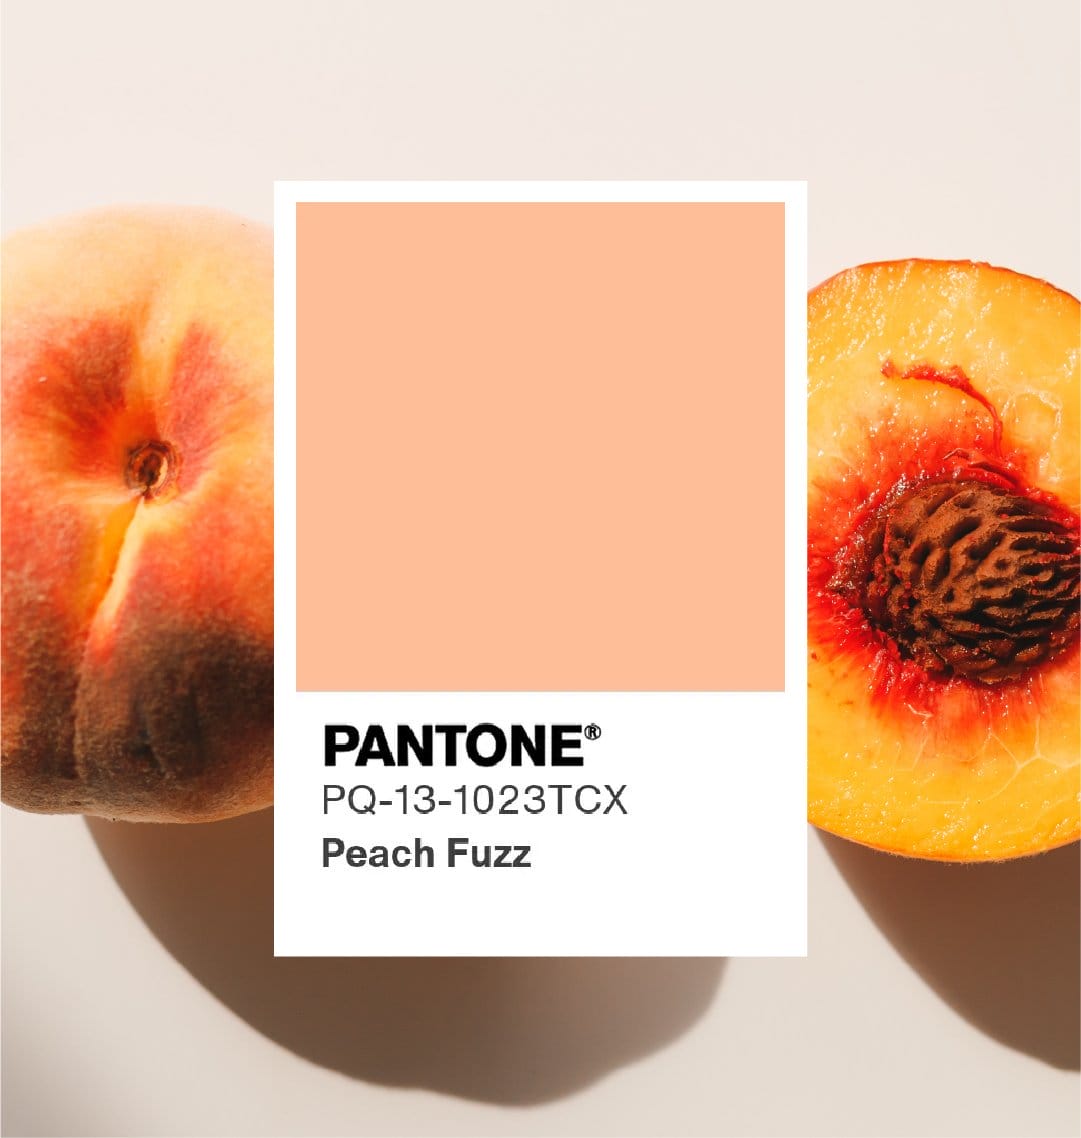 PEACHY SCENTS